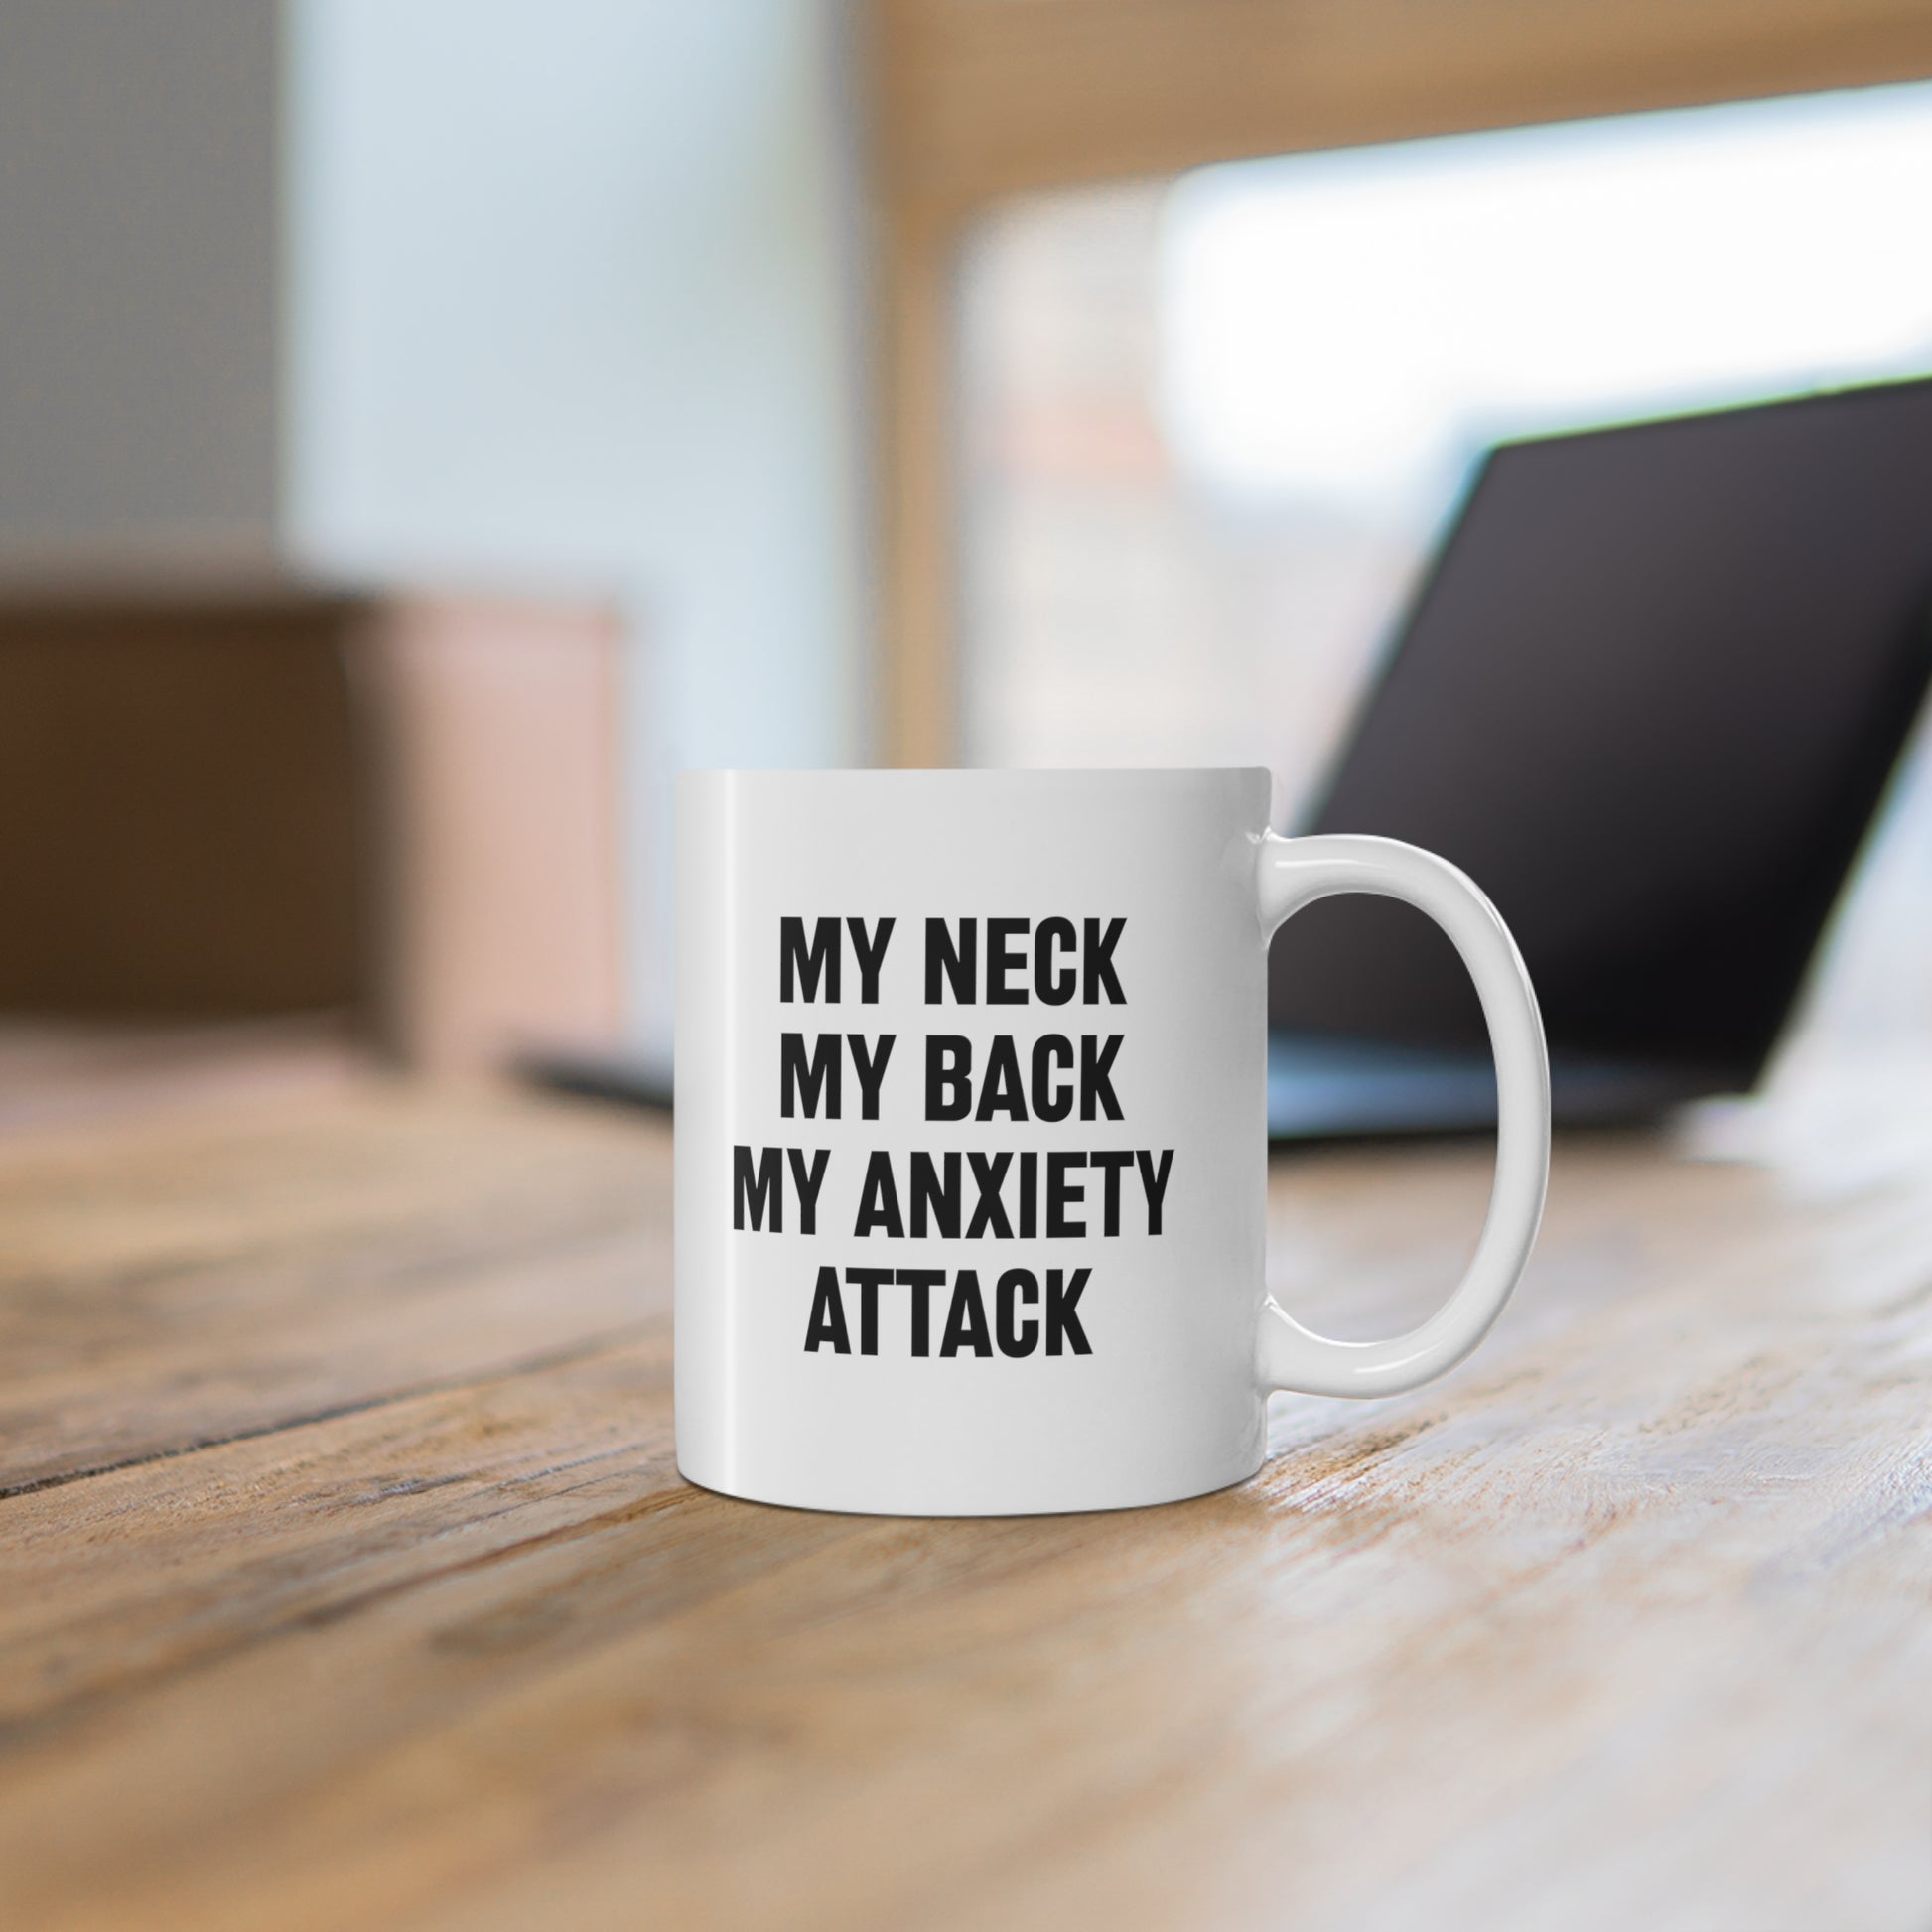 11oz ceramic mug with quote My neck my back my anxiety attack